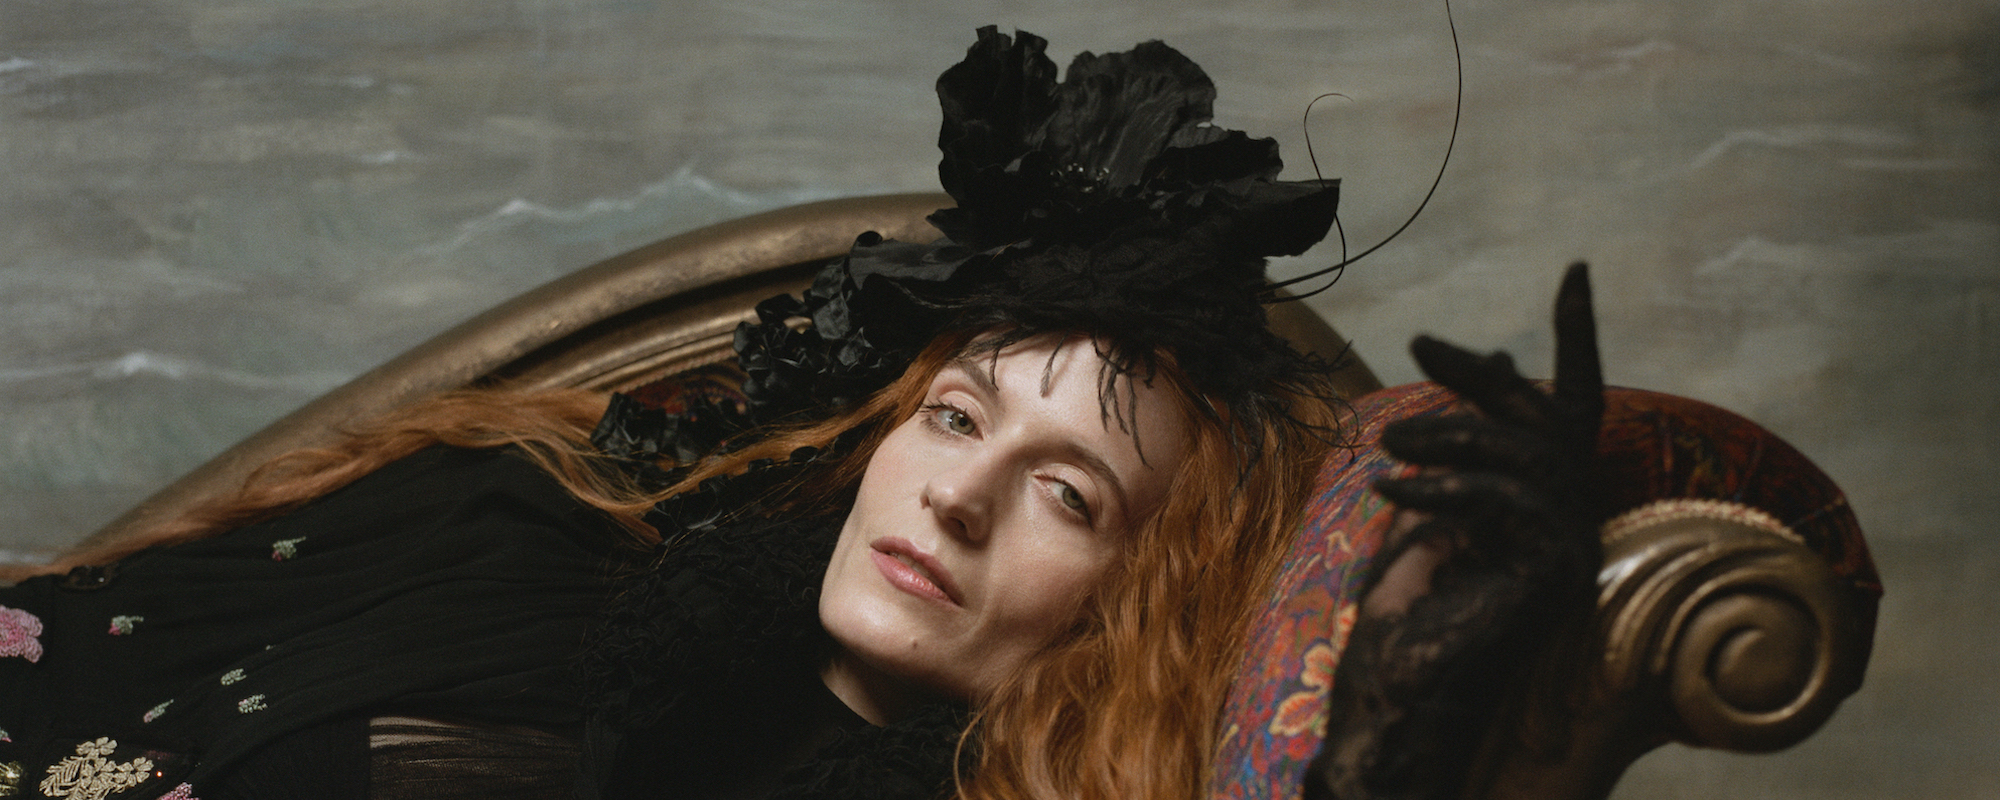 Listen: Florence + The Machine Craft “Deeply Unsettling” Cover of No Doubt’s “Just A Girl”